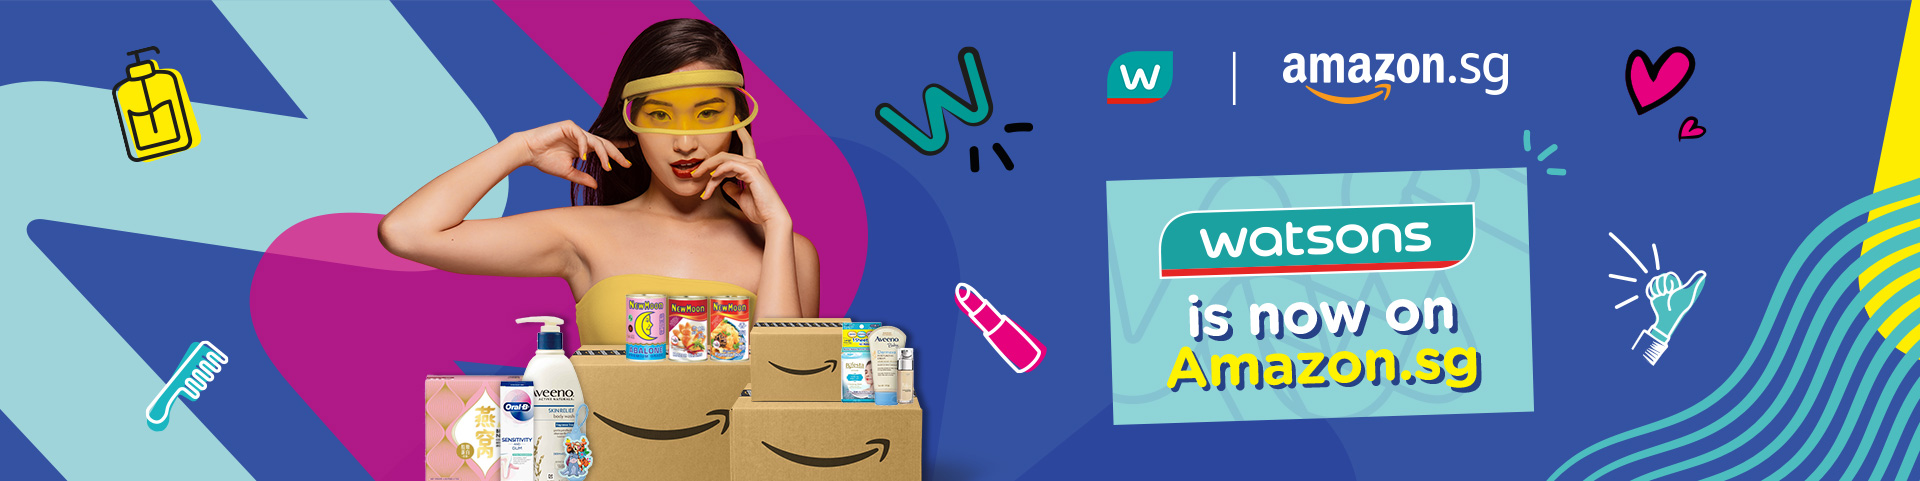 Watsons Enters Exclusive Partnership with Amazon Singapore Offering Customers Two-Hour Same Day Delivery